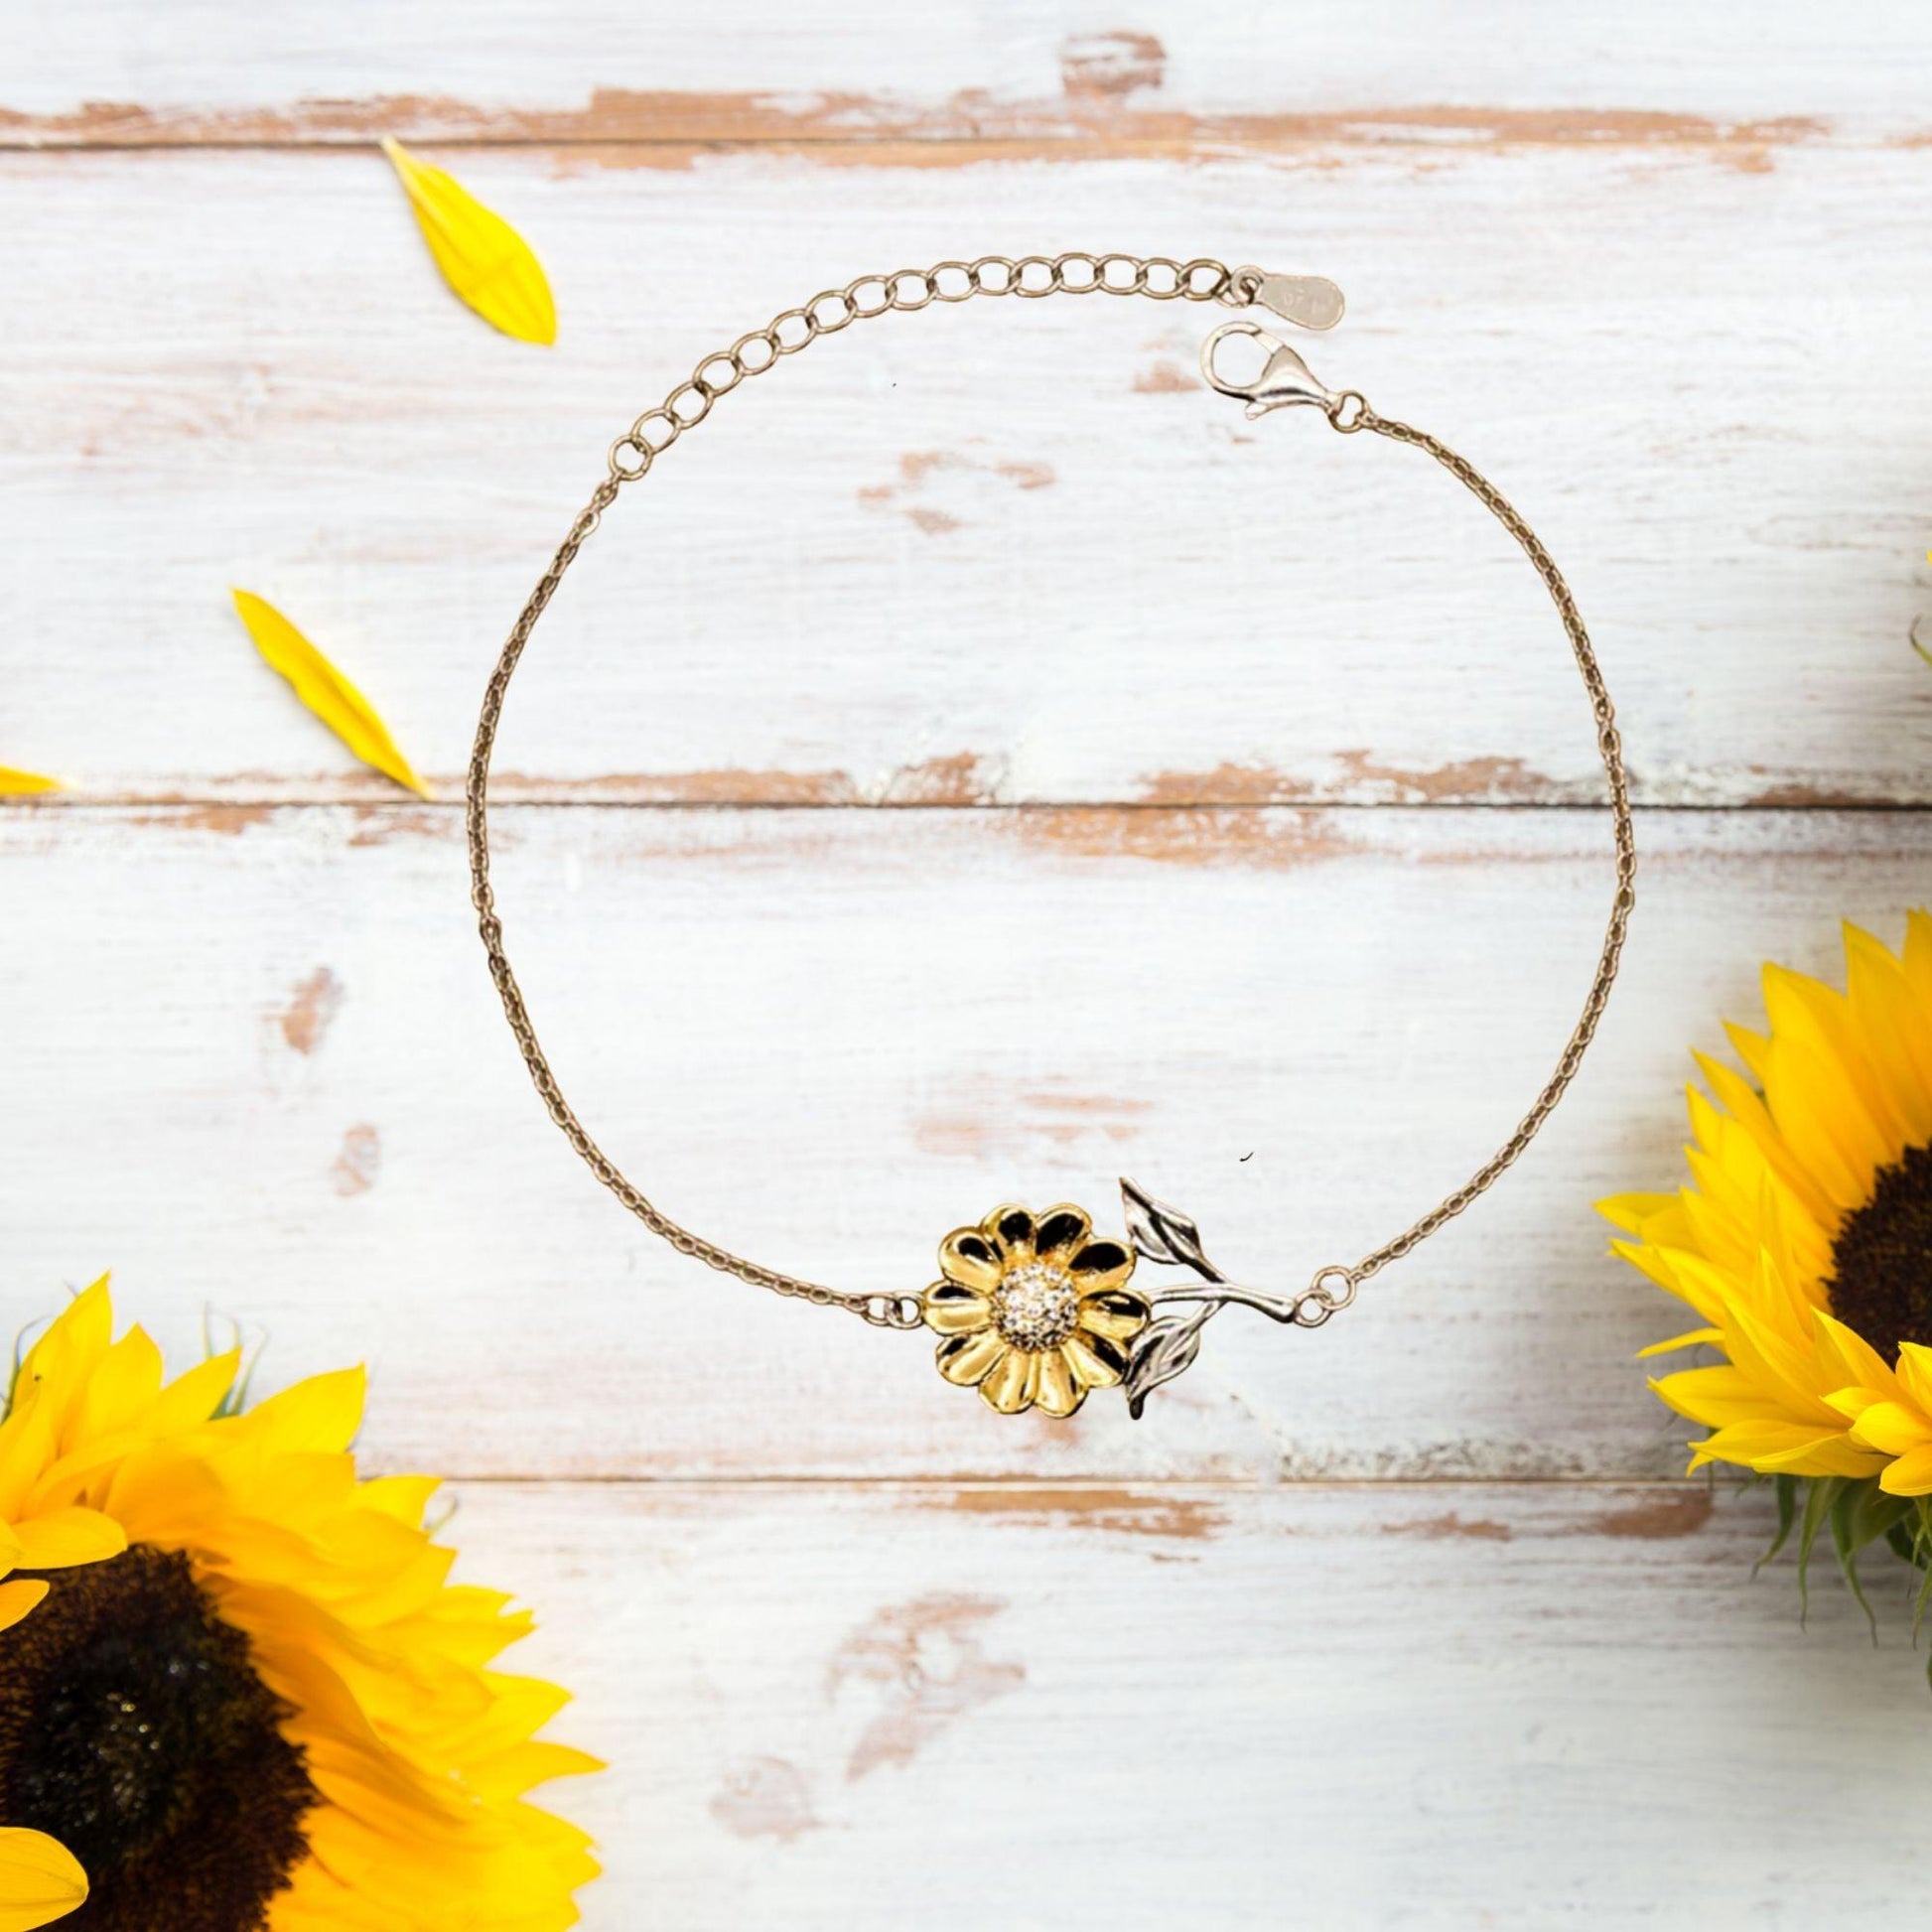 Sunflower Bracelet for Stepdad Present, Stepdad Always follow your dreams, never forget how amazing you are, Stepdad Birthday Christmas Gifts Jewelry for Girls Boys Teen Men Women - Mallard Moon Gift Shop